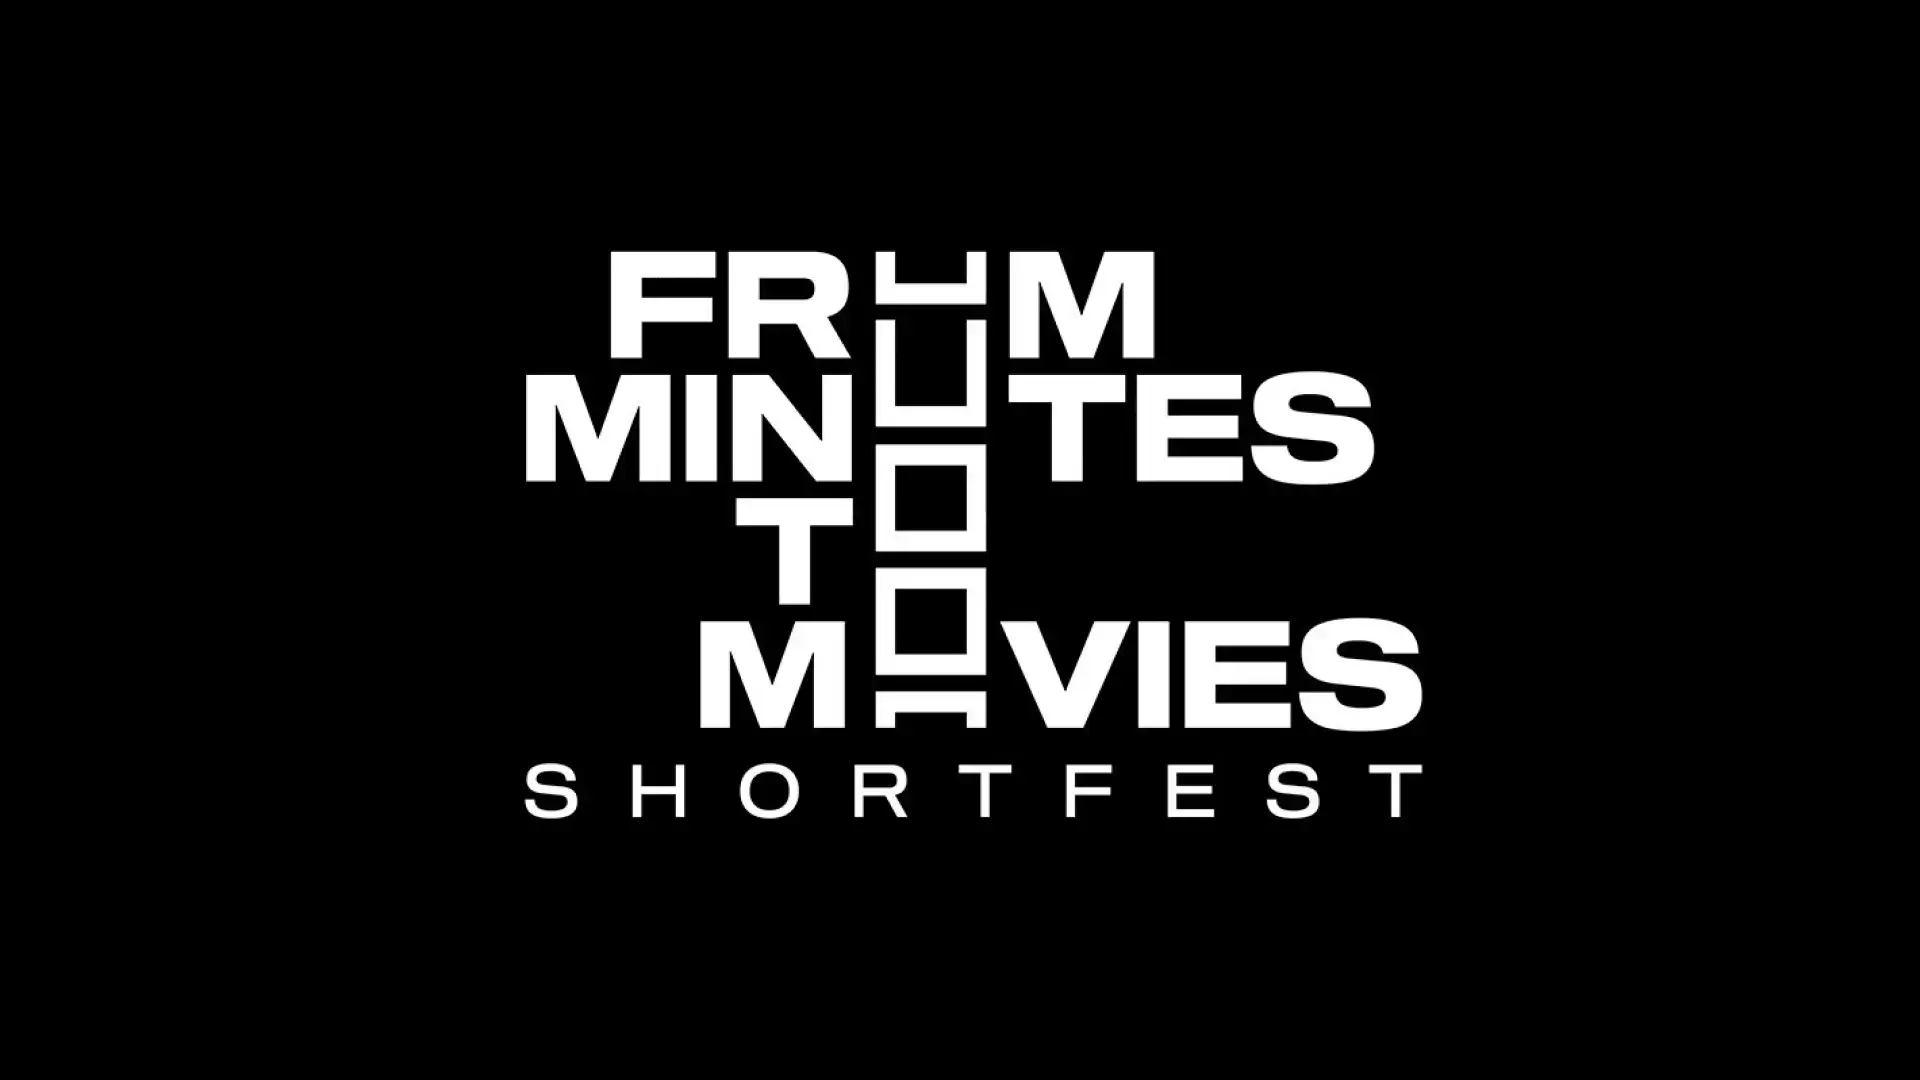 The From Minutes to Movies Shortfest logo